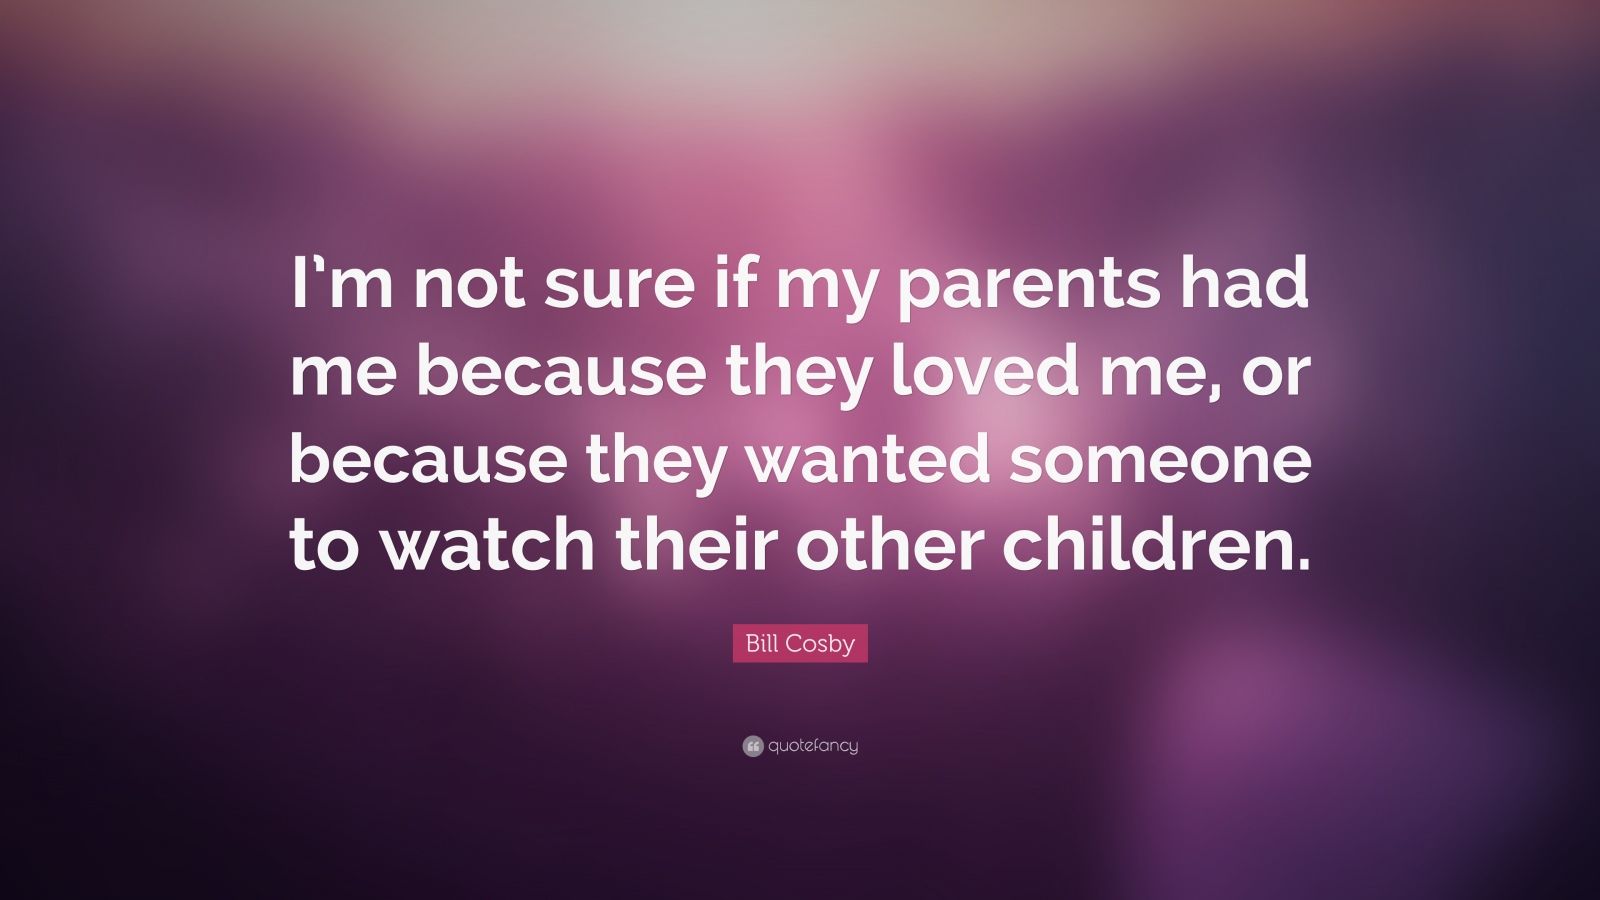 Bill Cosby Quote: “I’m not sure if my parents had me because they loved ...